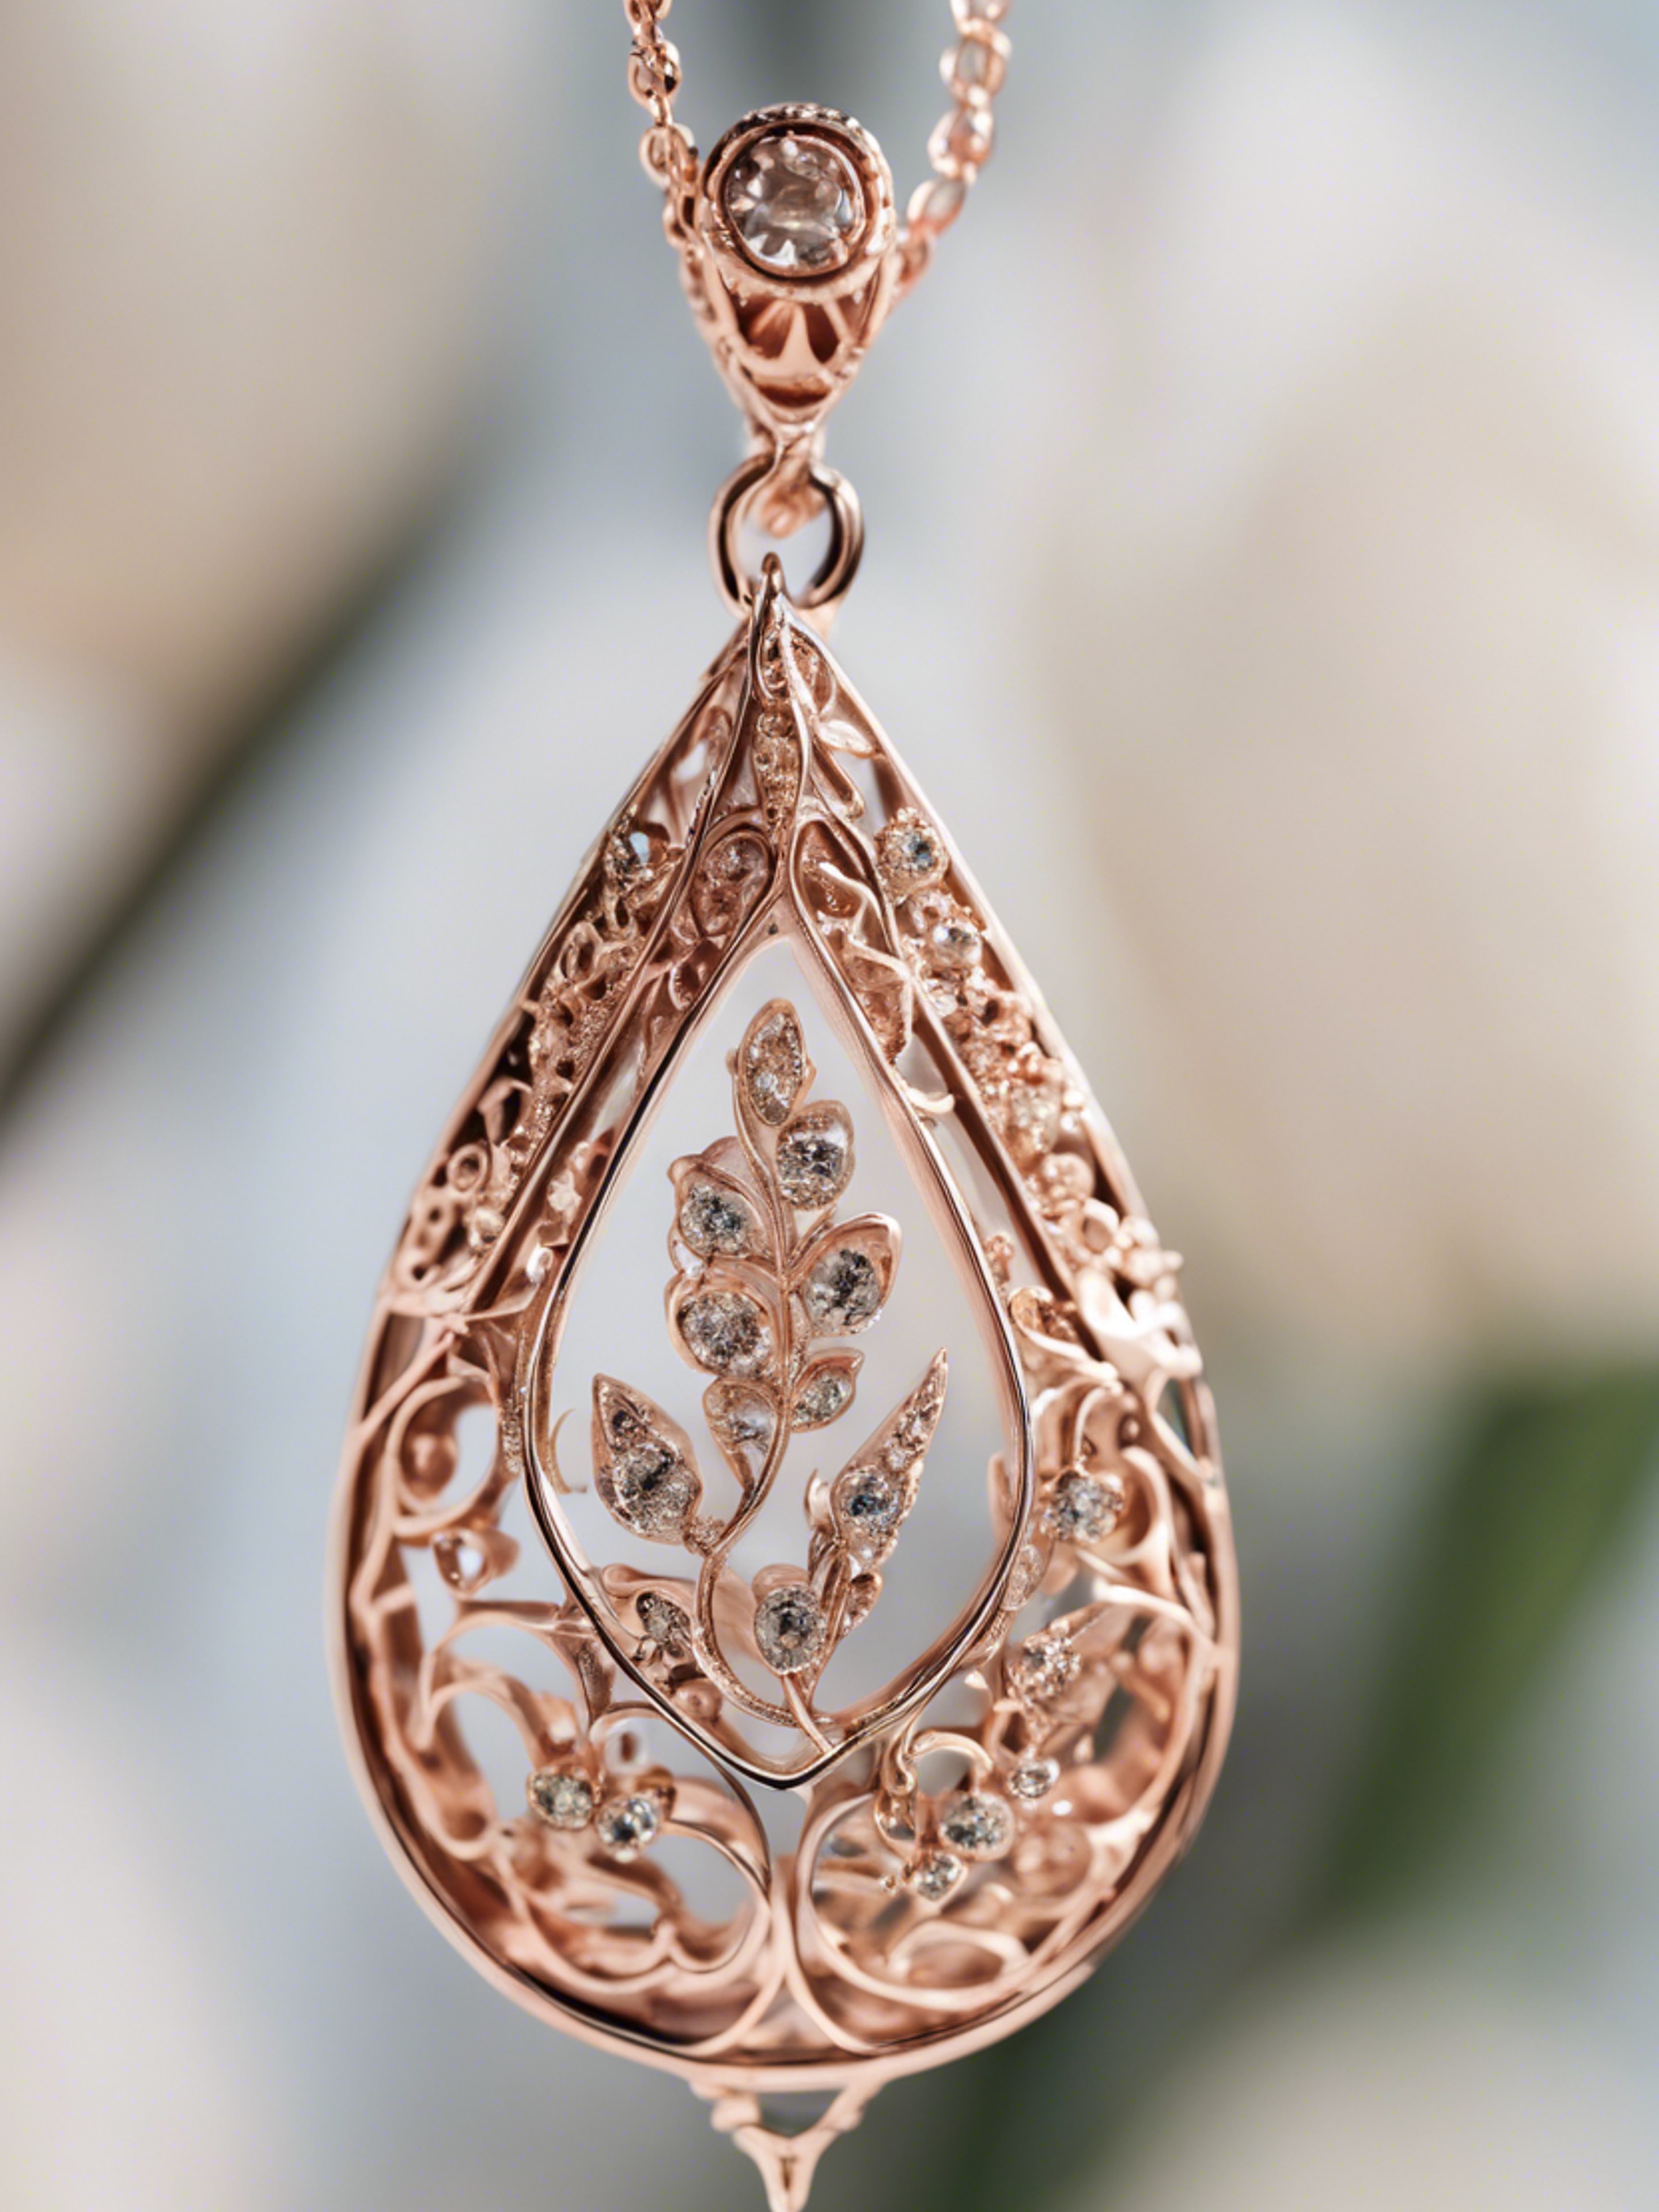 A close-up of a rose gold teardrop-shaped pendant with an intricate, floral design. Wallpaper[94a65aa8484349f1bf09]